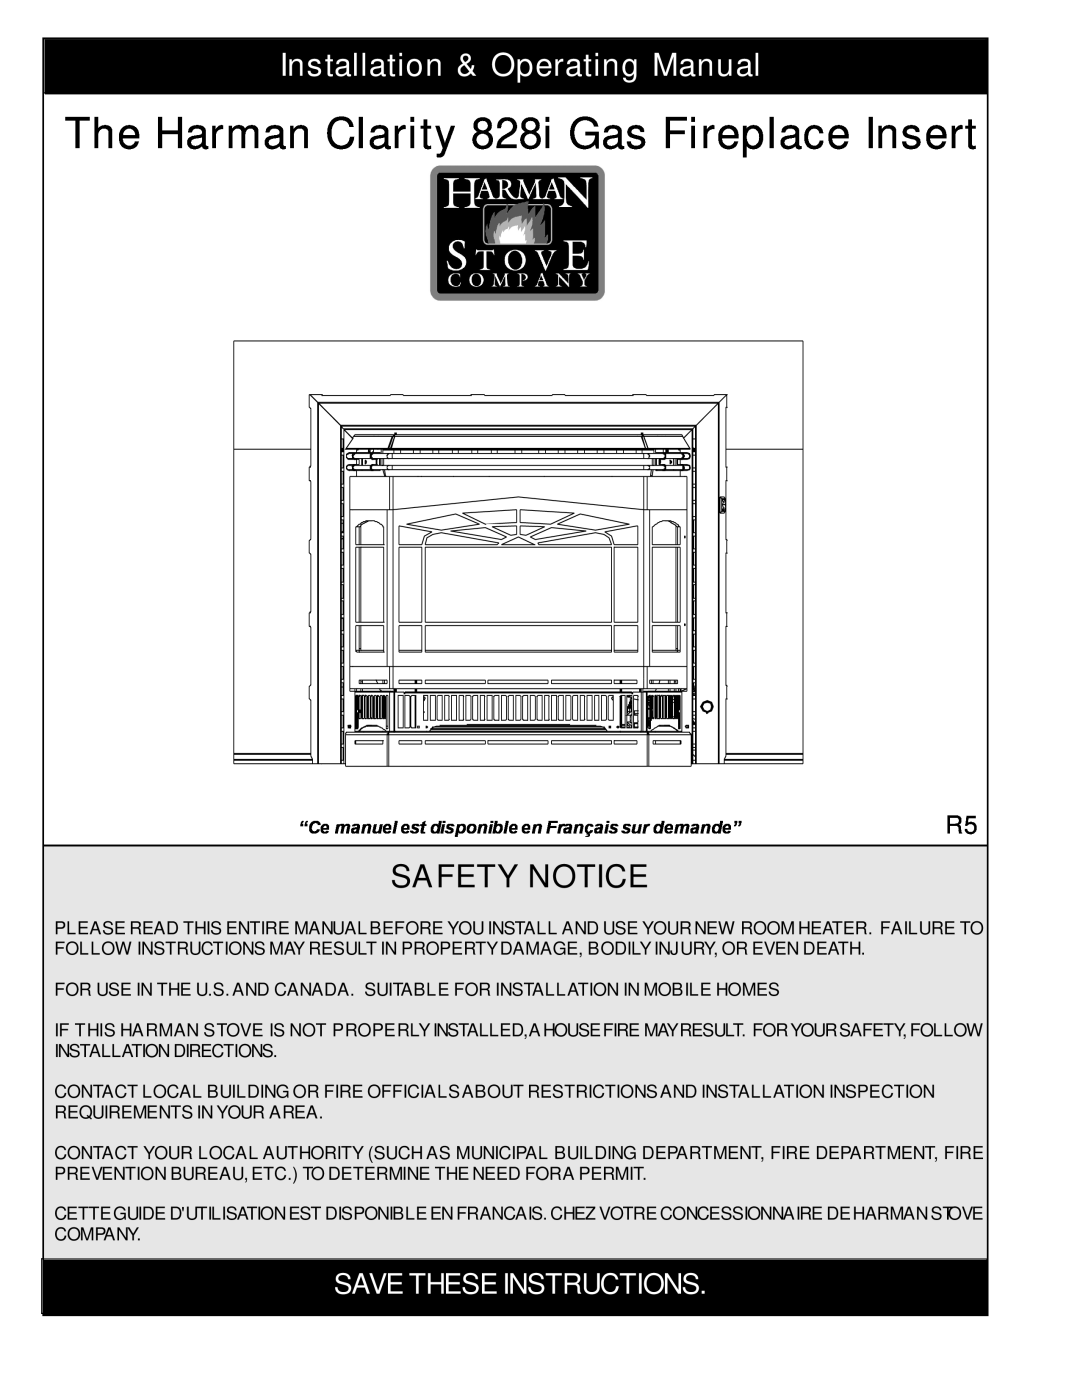 Harman Stove Company manual Safety Notice, The Harman Clarity 828i Gas Fireplace Insert, Save These Instructions 